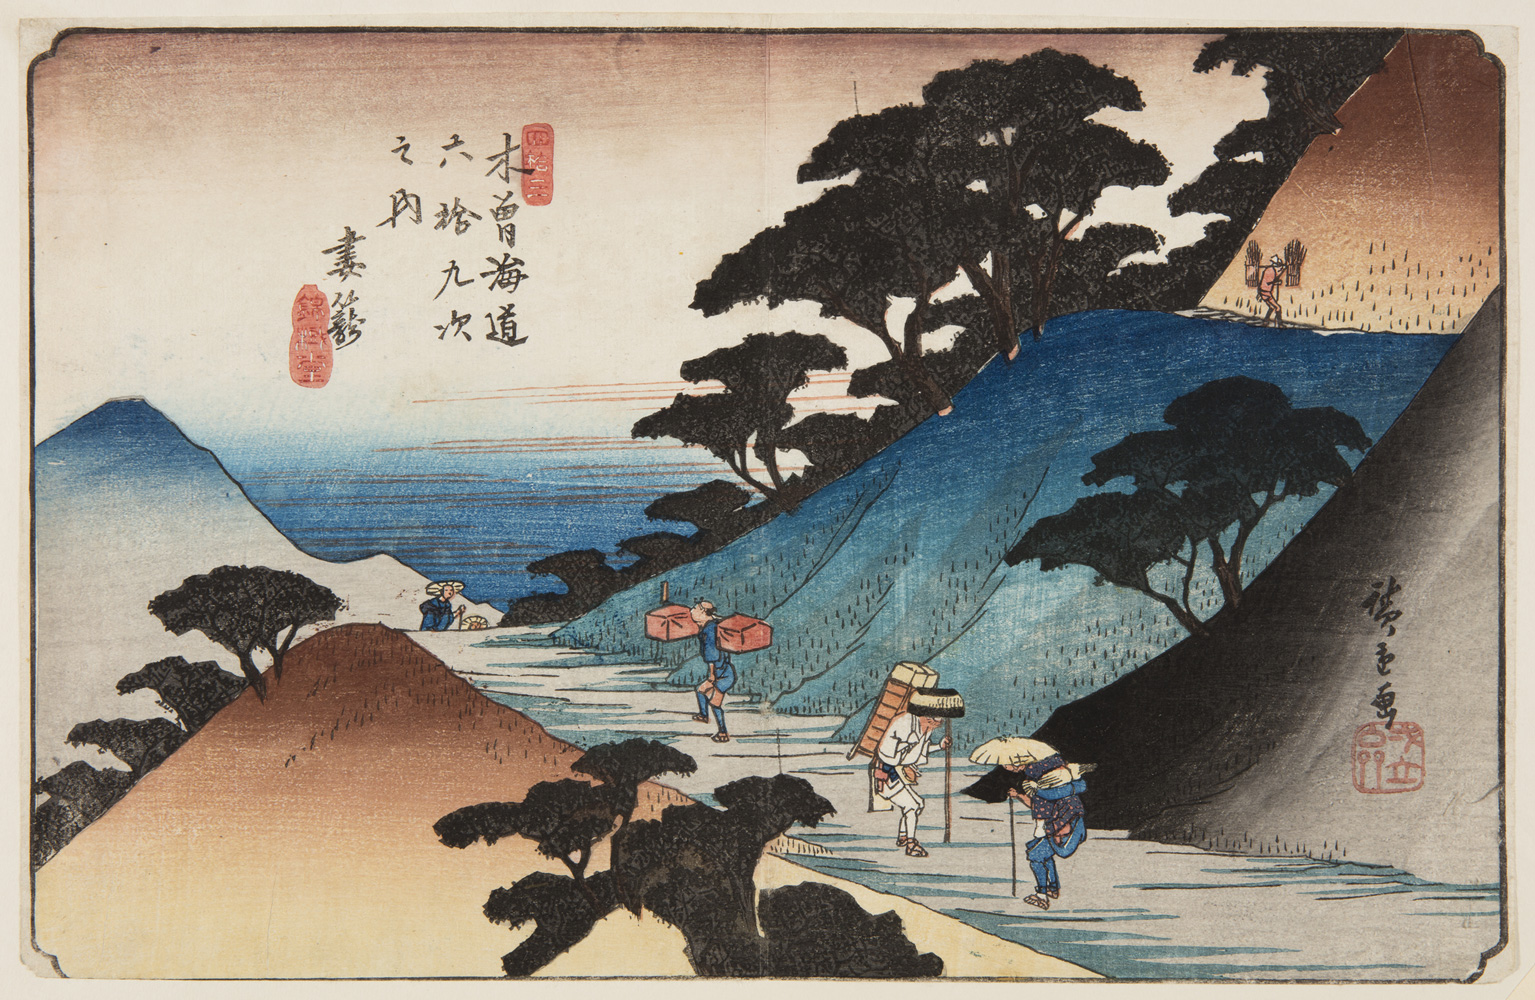 Japanese print of a landscape. A road through mountains. Four travelers walk along the road in traditional dress carrying boxes and holding walking sticks.